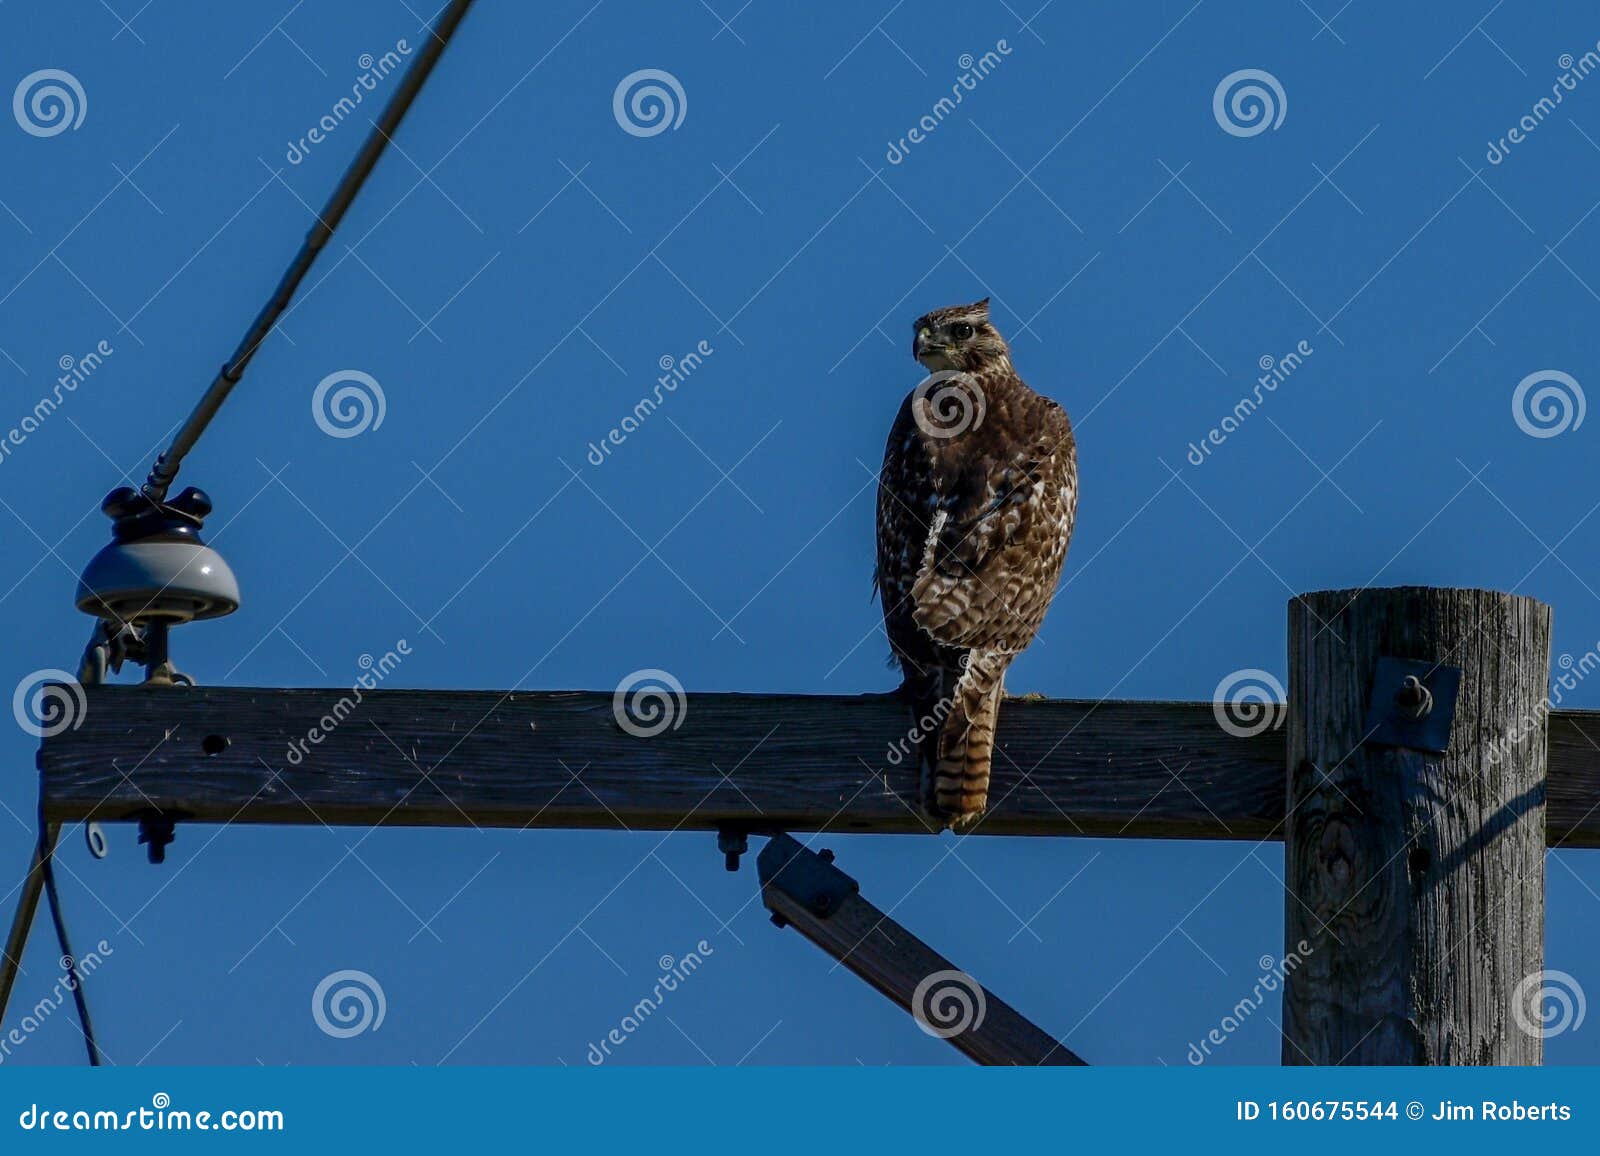 A Hawk Perched on a Telephone Pole Stock Photo - Image of fall, october ...